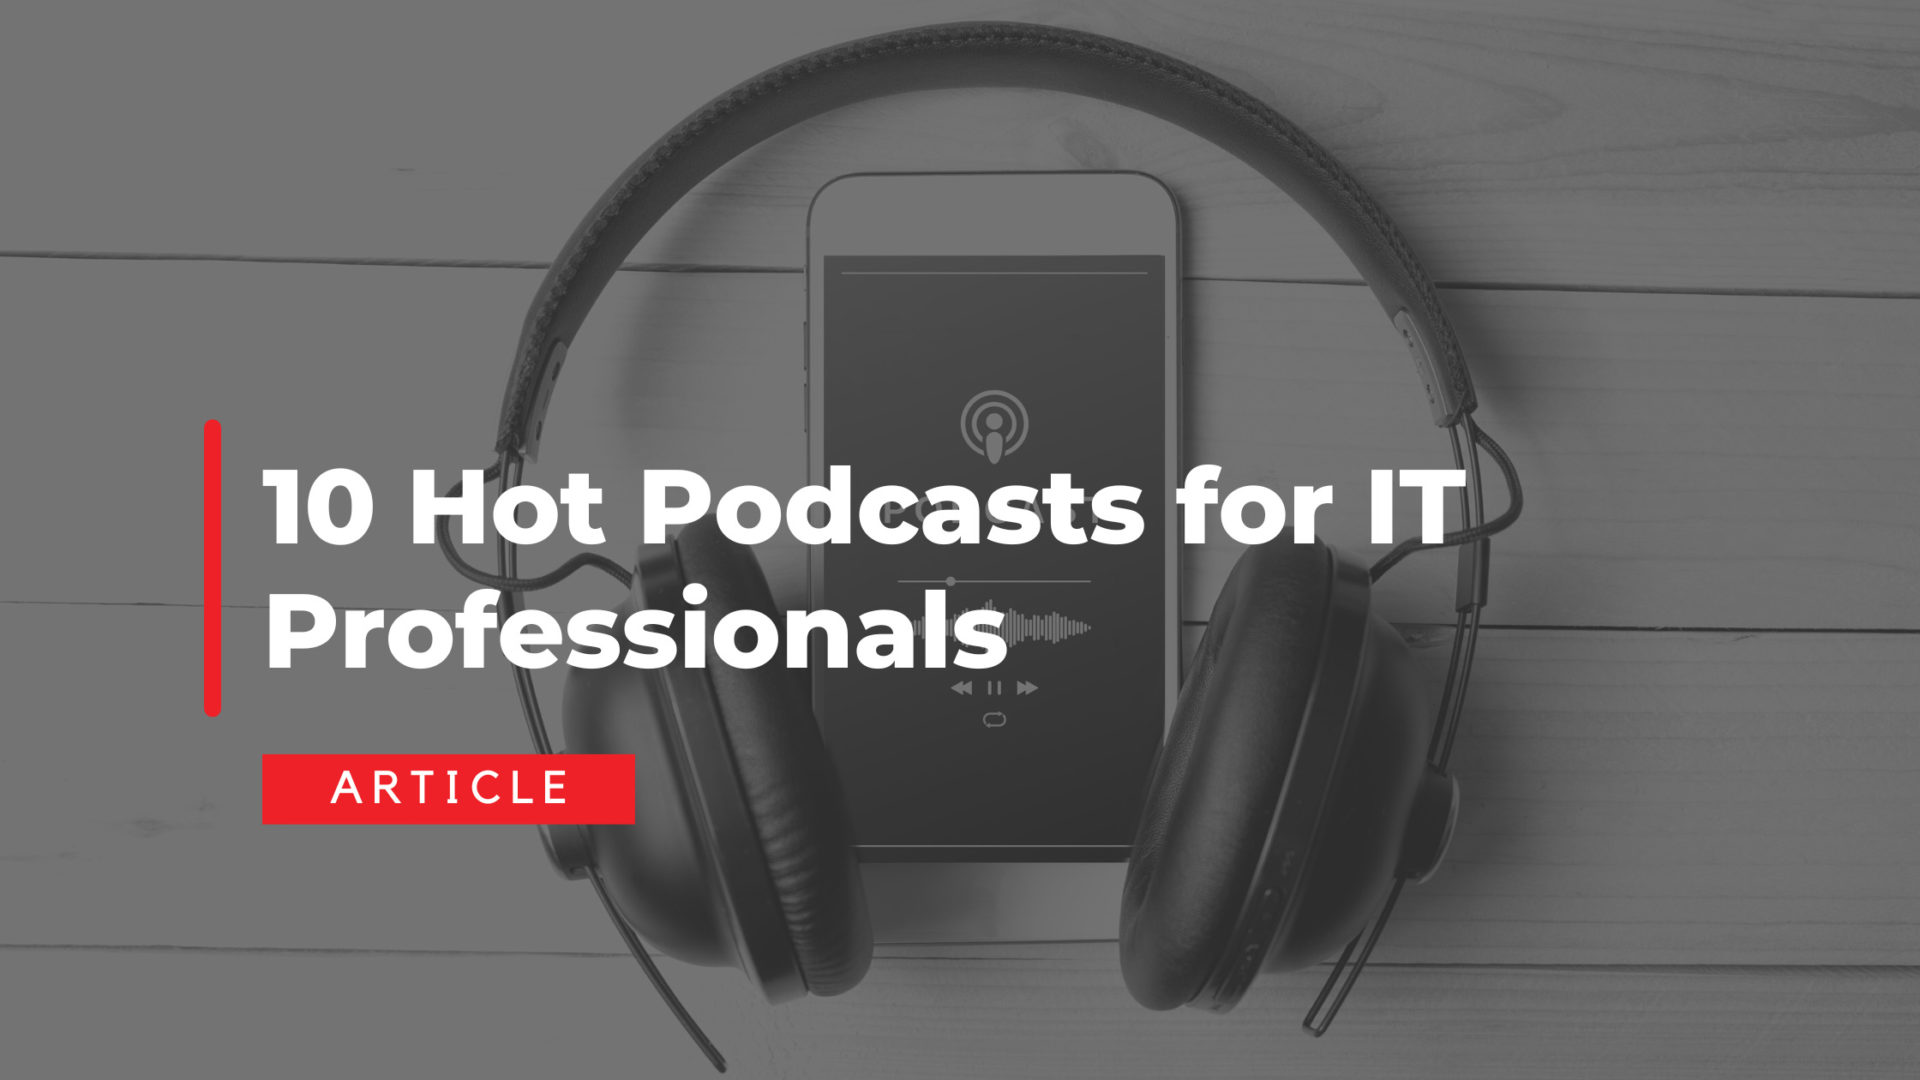 10 Hot Podcasts for IT Professionals